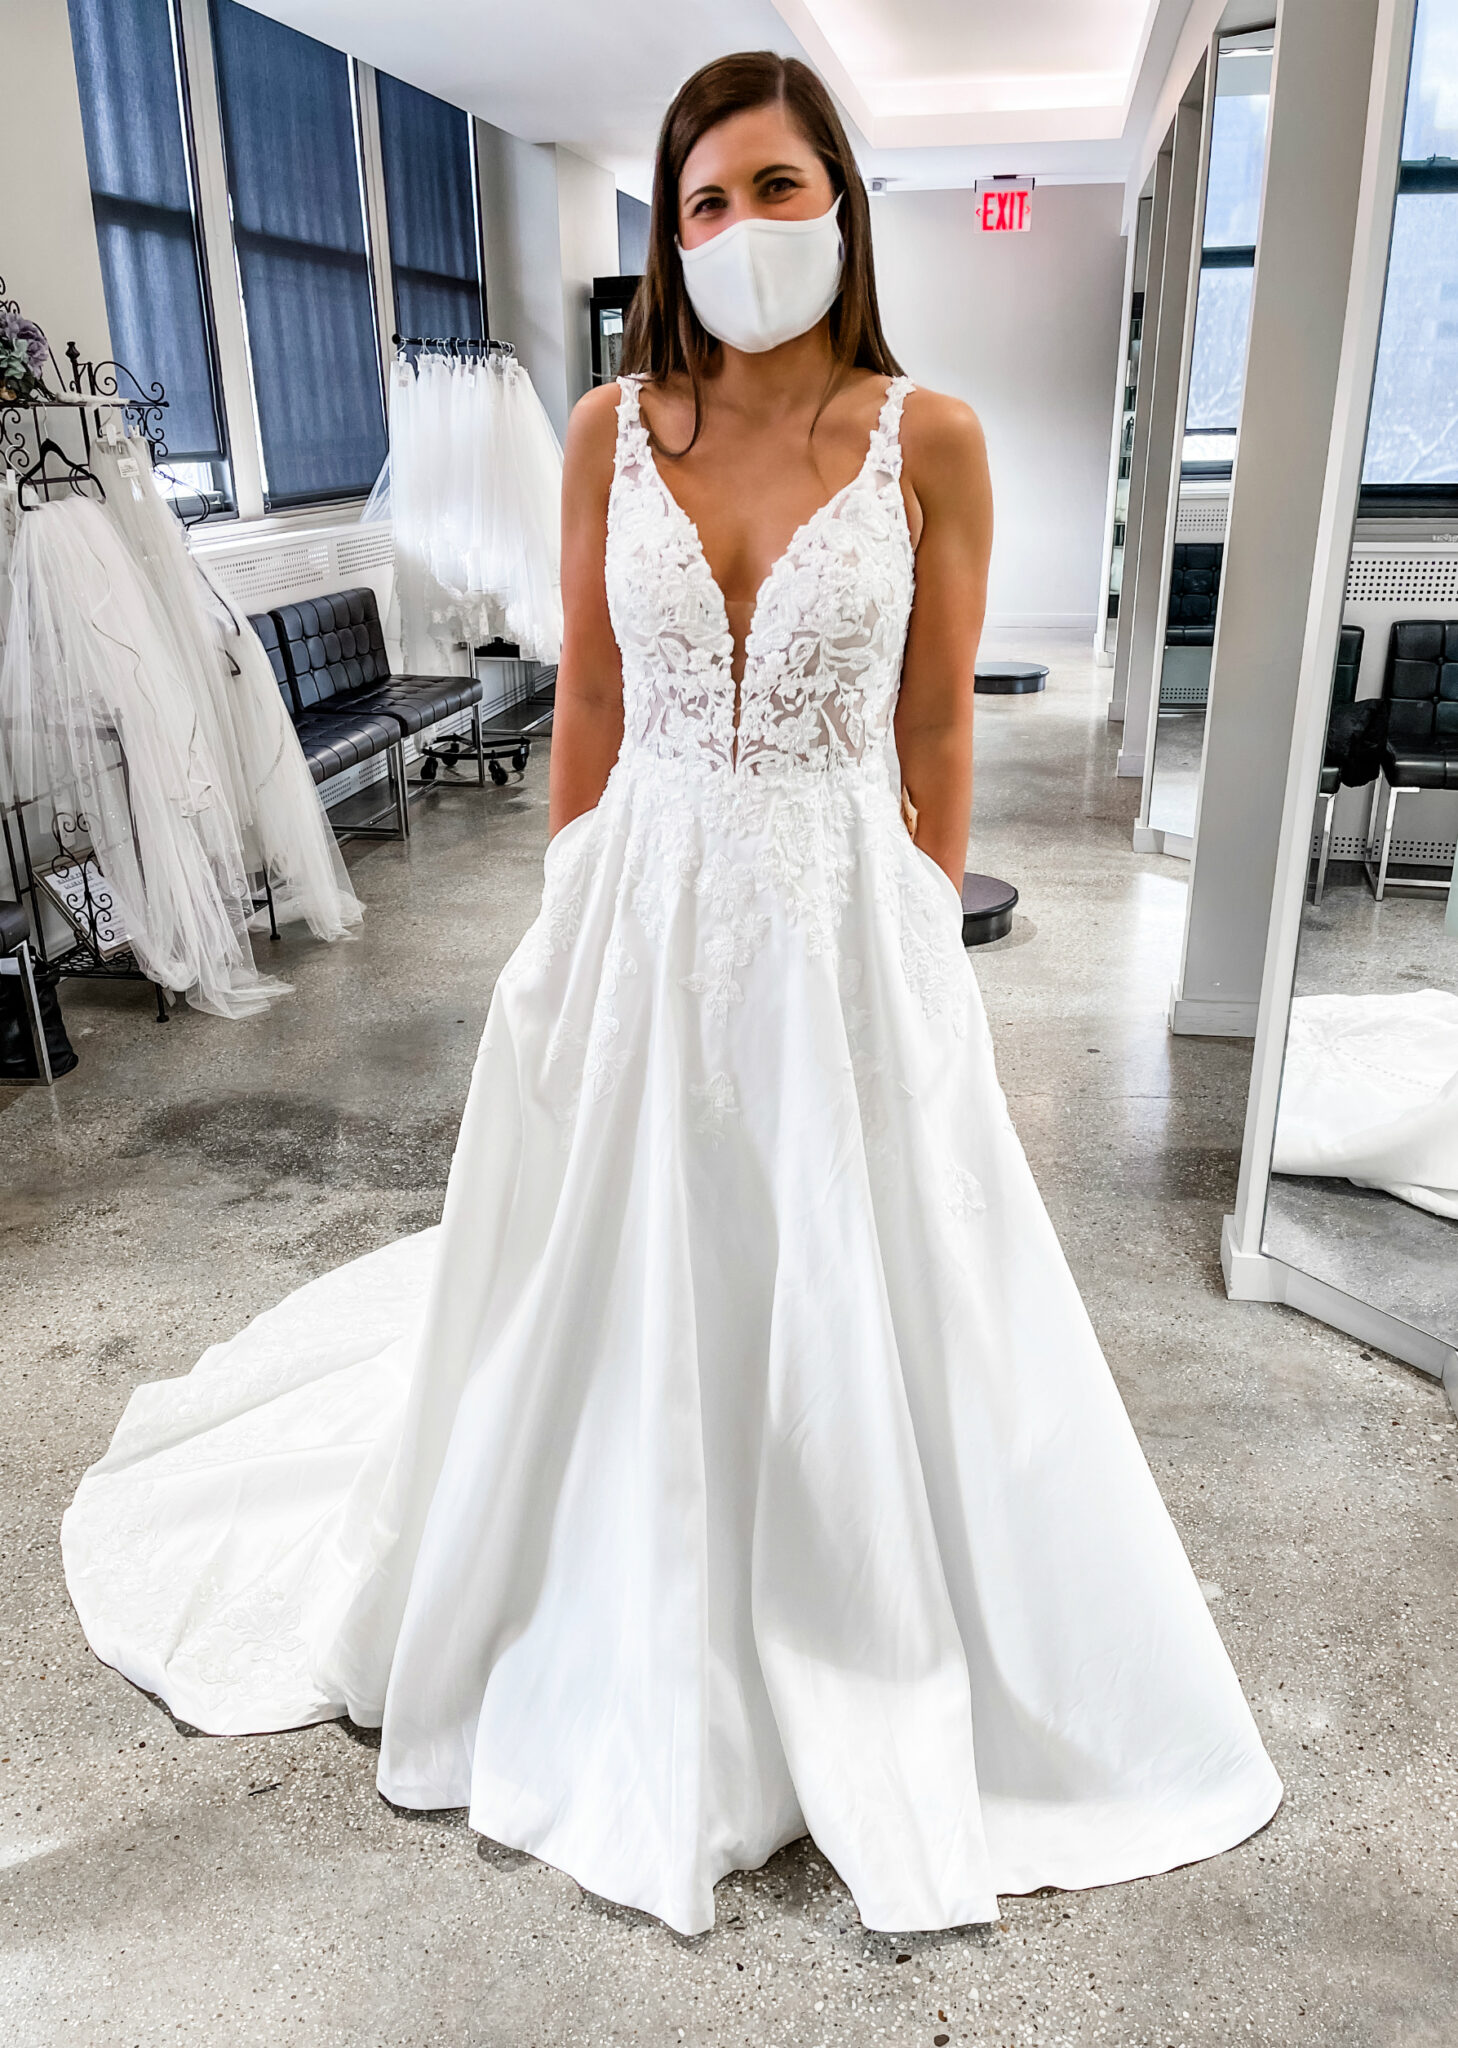 Wedding Dress Shopping: What To Expect & Tips To Ensure A Great ...